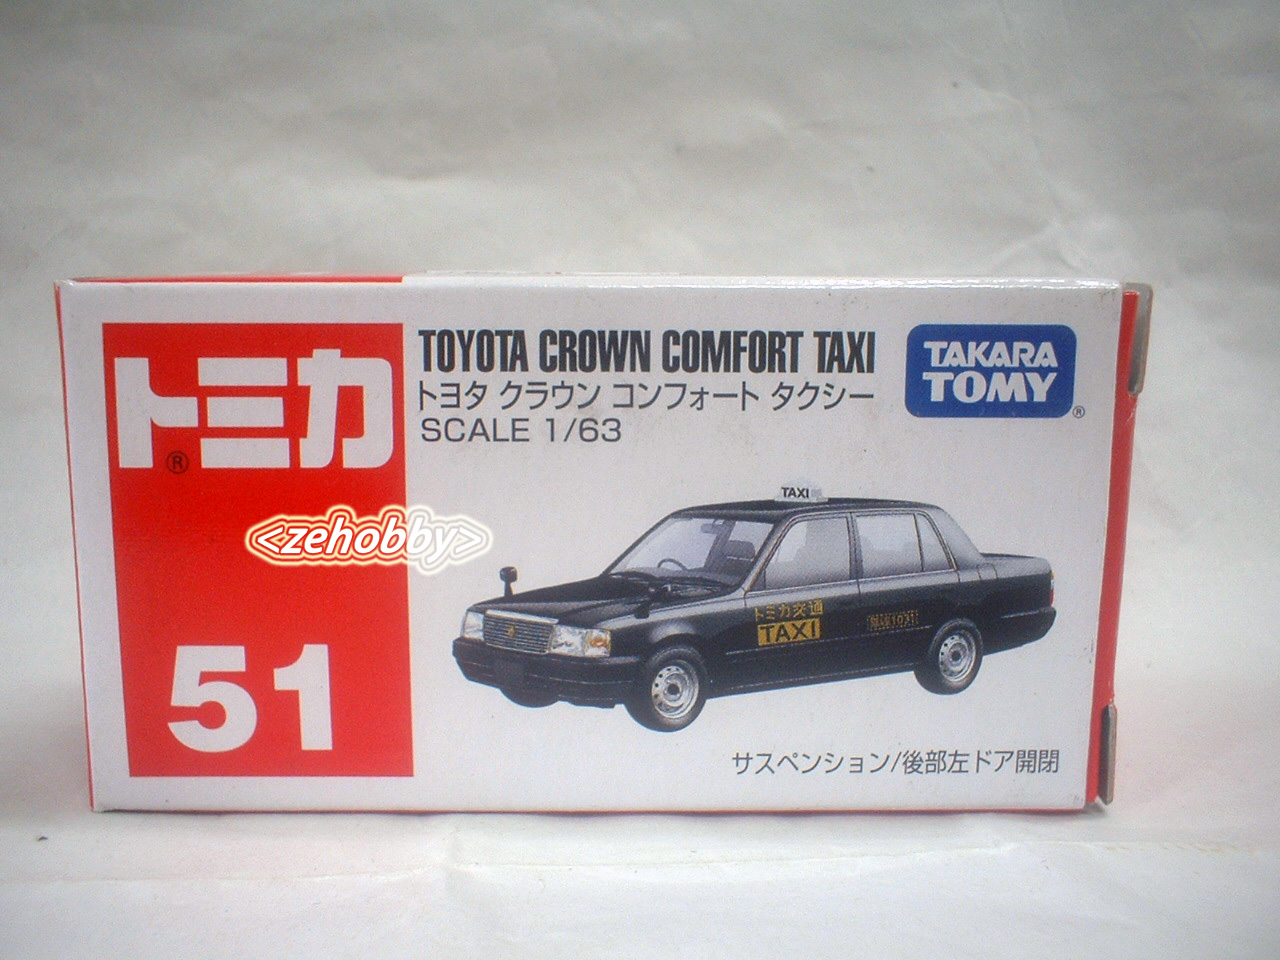 Zehobby: ~ Tomica Toyota Crown Comfort Taxi